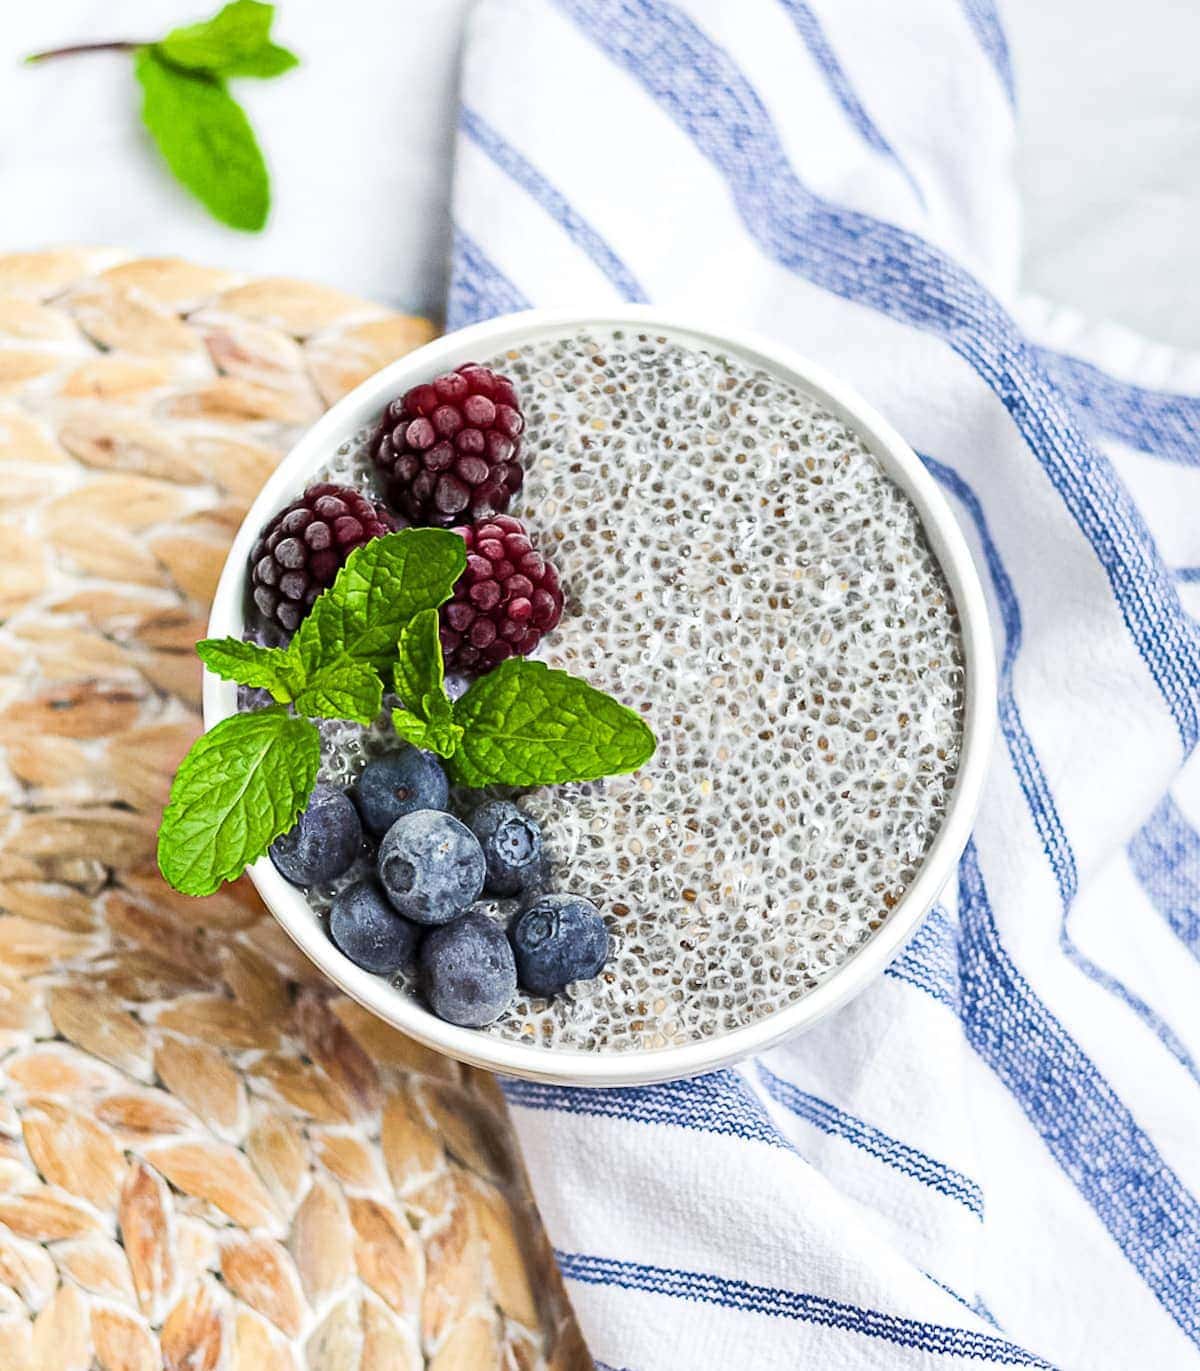 Chia seed pudding in a white bowl garnished with berries and fresh mint sprigs.